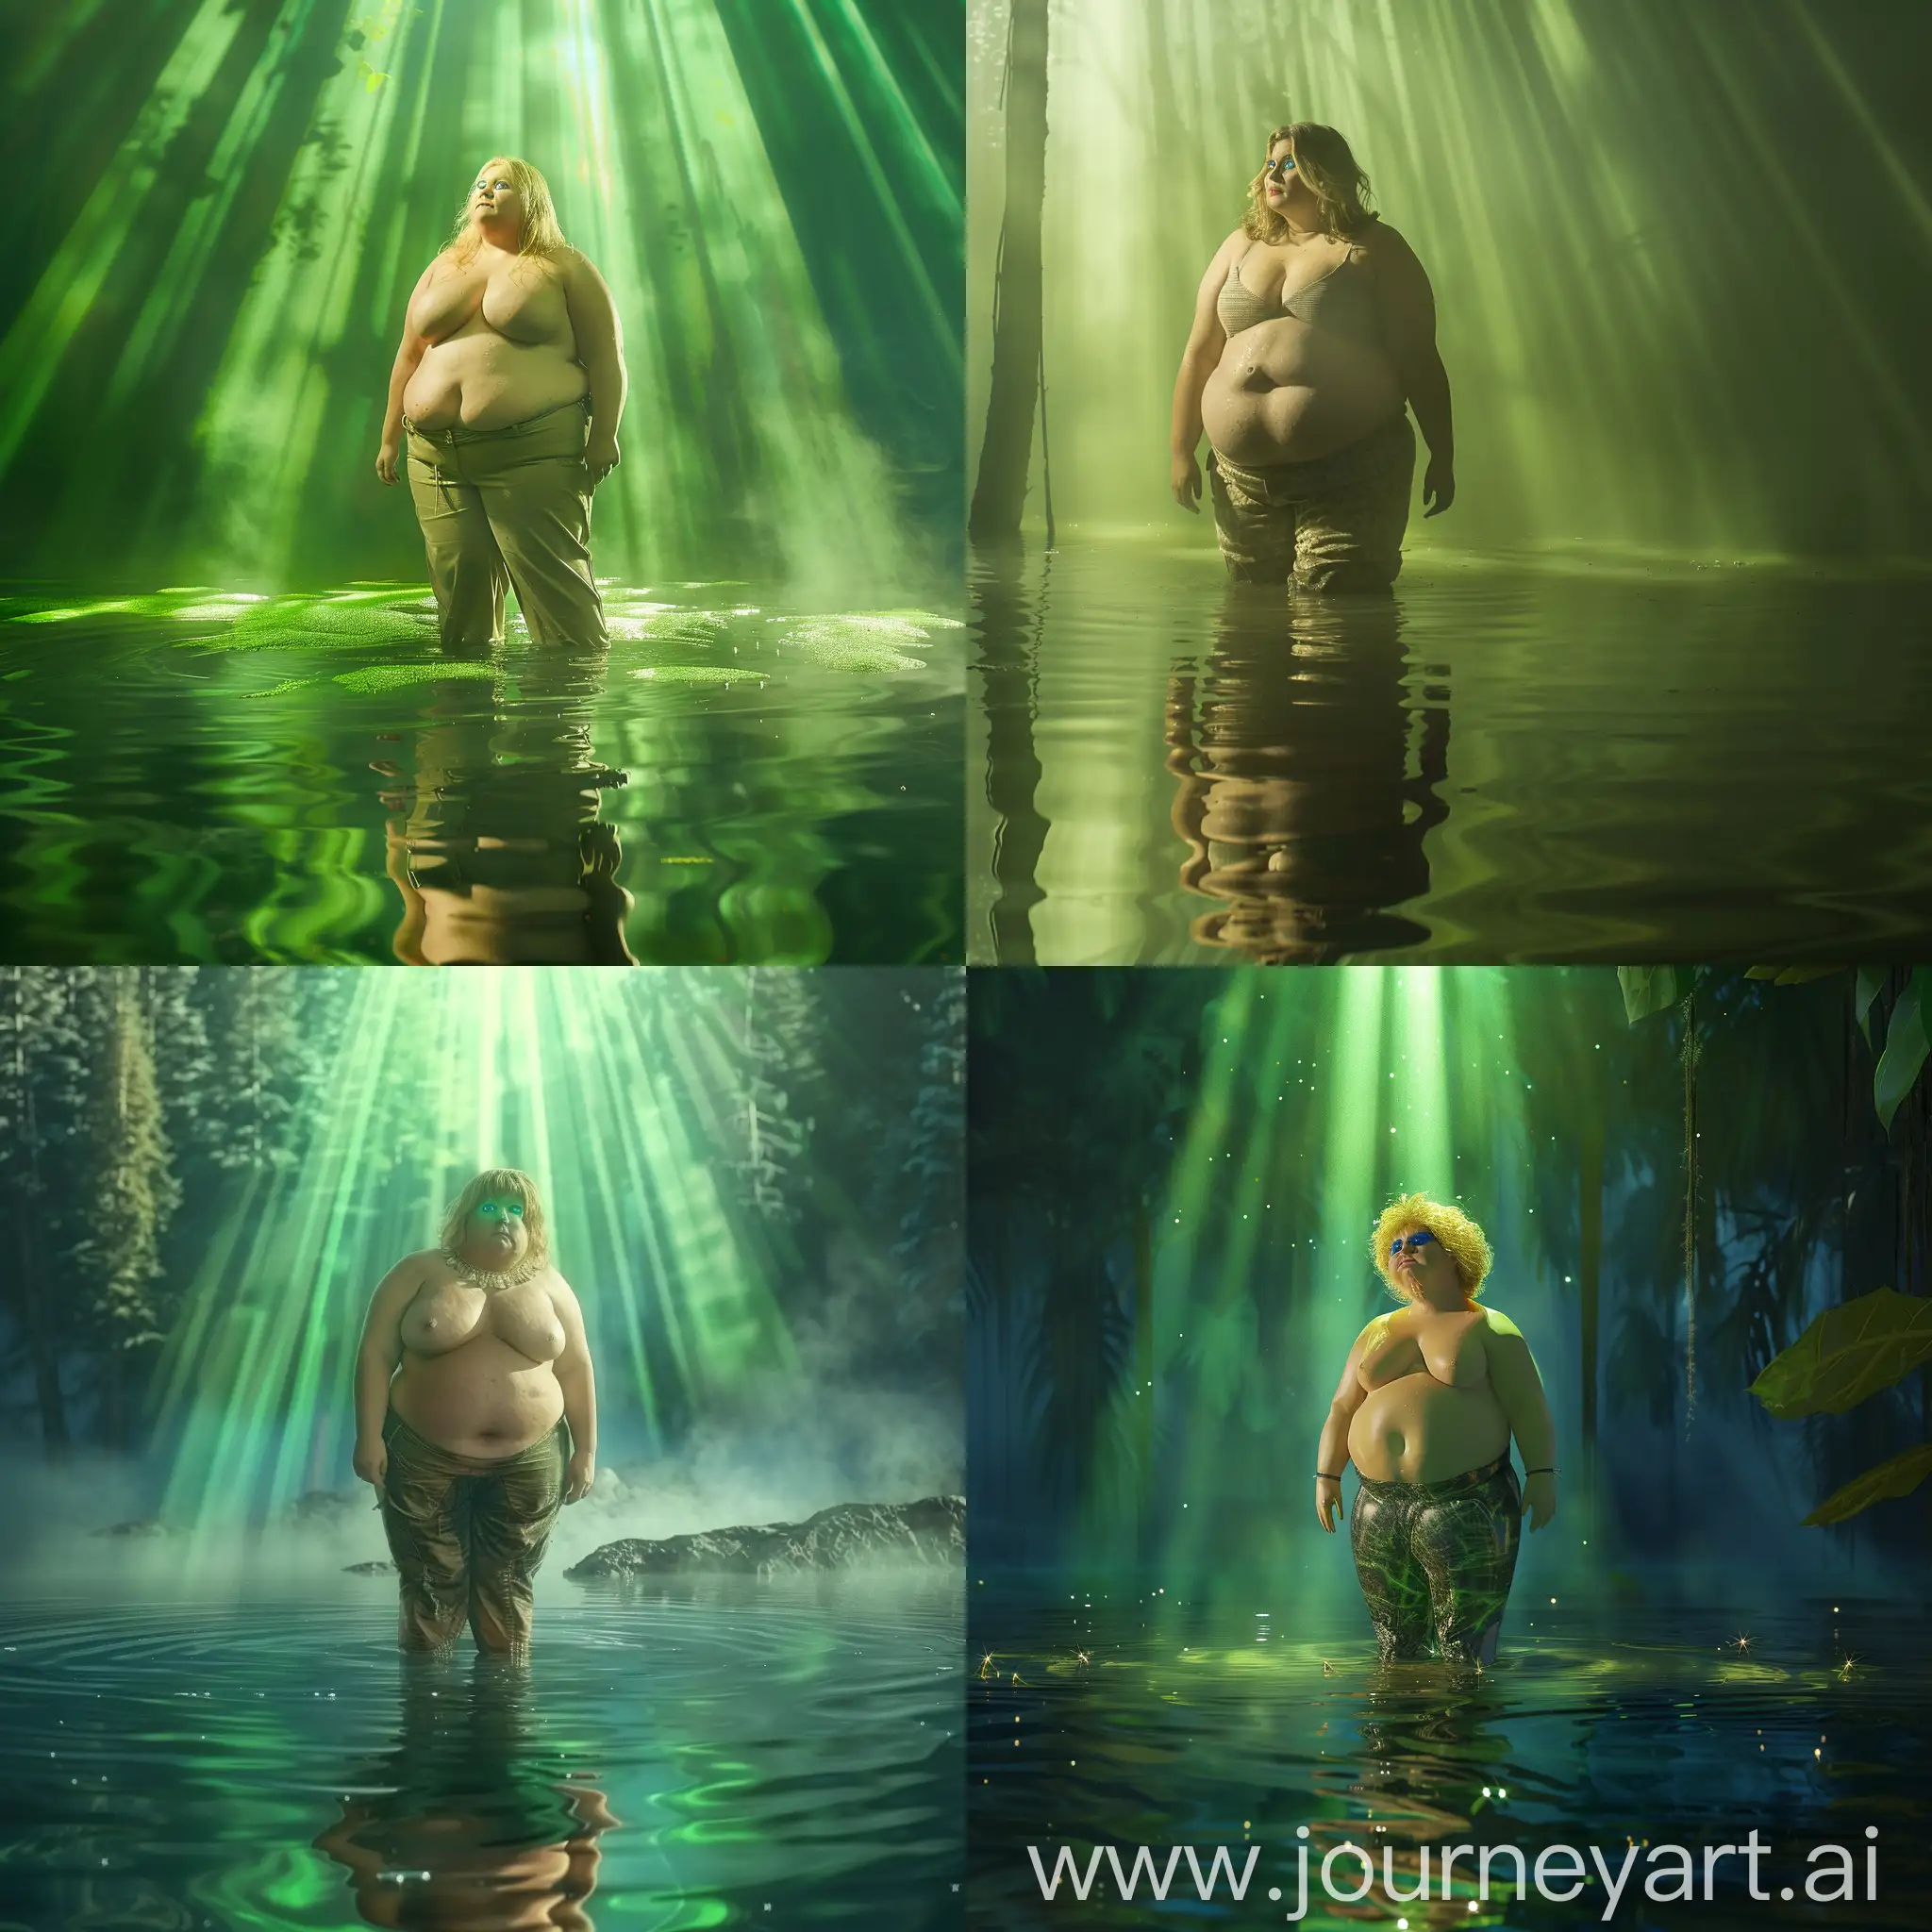 Chubby woman standing in a lake, wearing only pants, having blue eyes and blonde hair, with green light coming from above